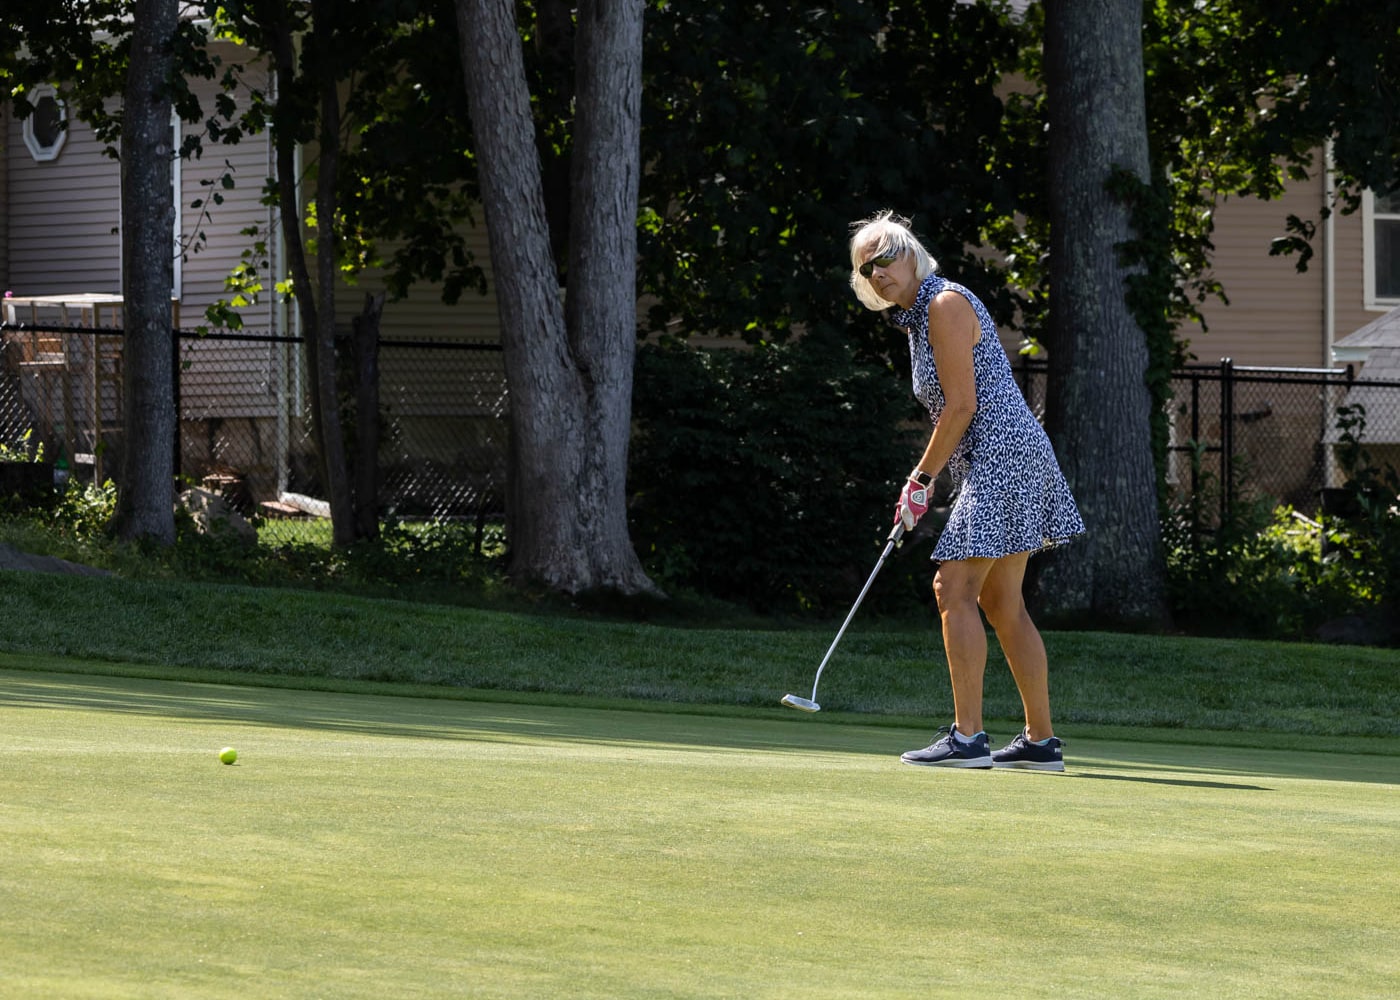 Country-Club-Of-New-Bedford FB-2023-Womens-FB-Gallery August-2023-Country-Club-Of-New-Bedford-FB-2023-Womens-FB-Gallery August-2023-Womens-FB-Gallery-Tuesday-Photos-Image-19